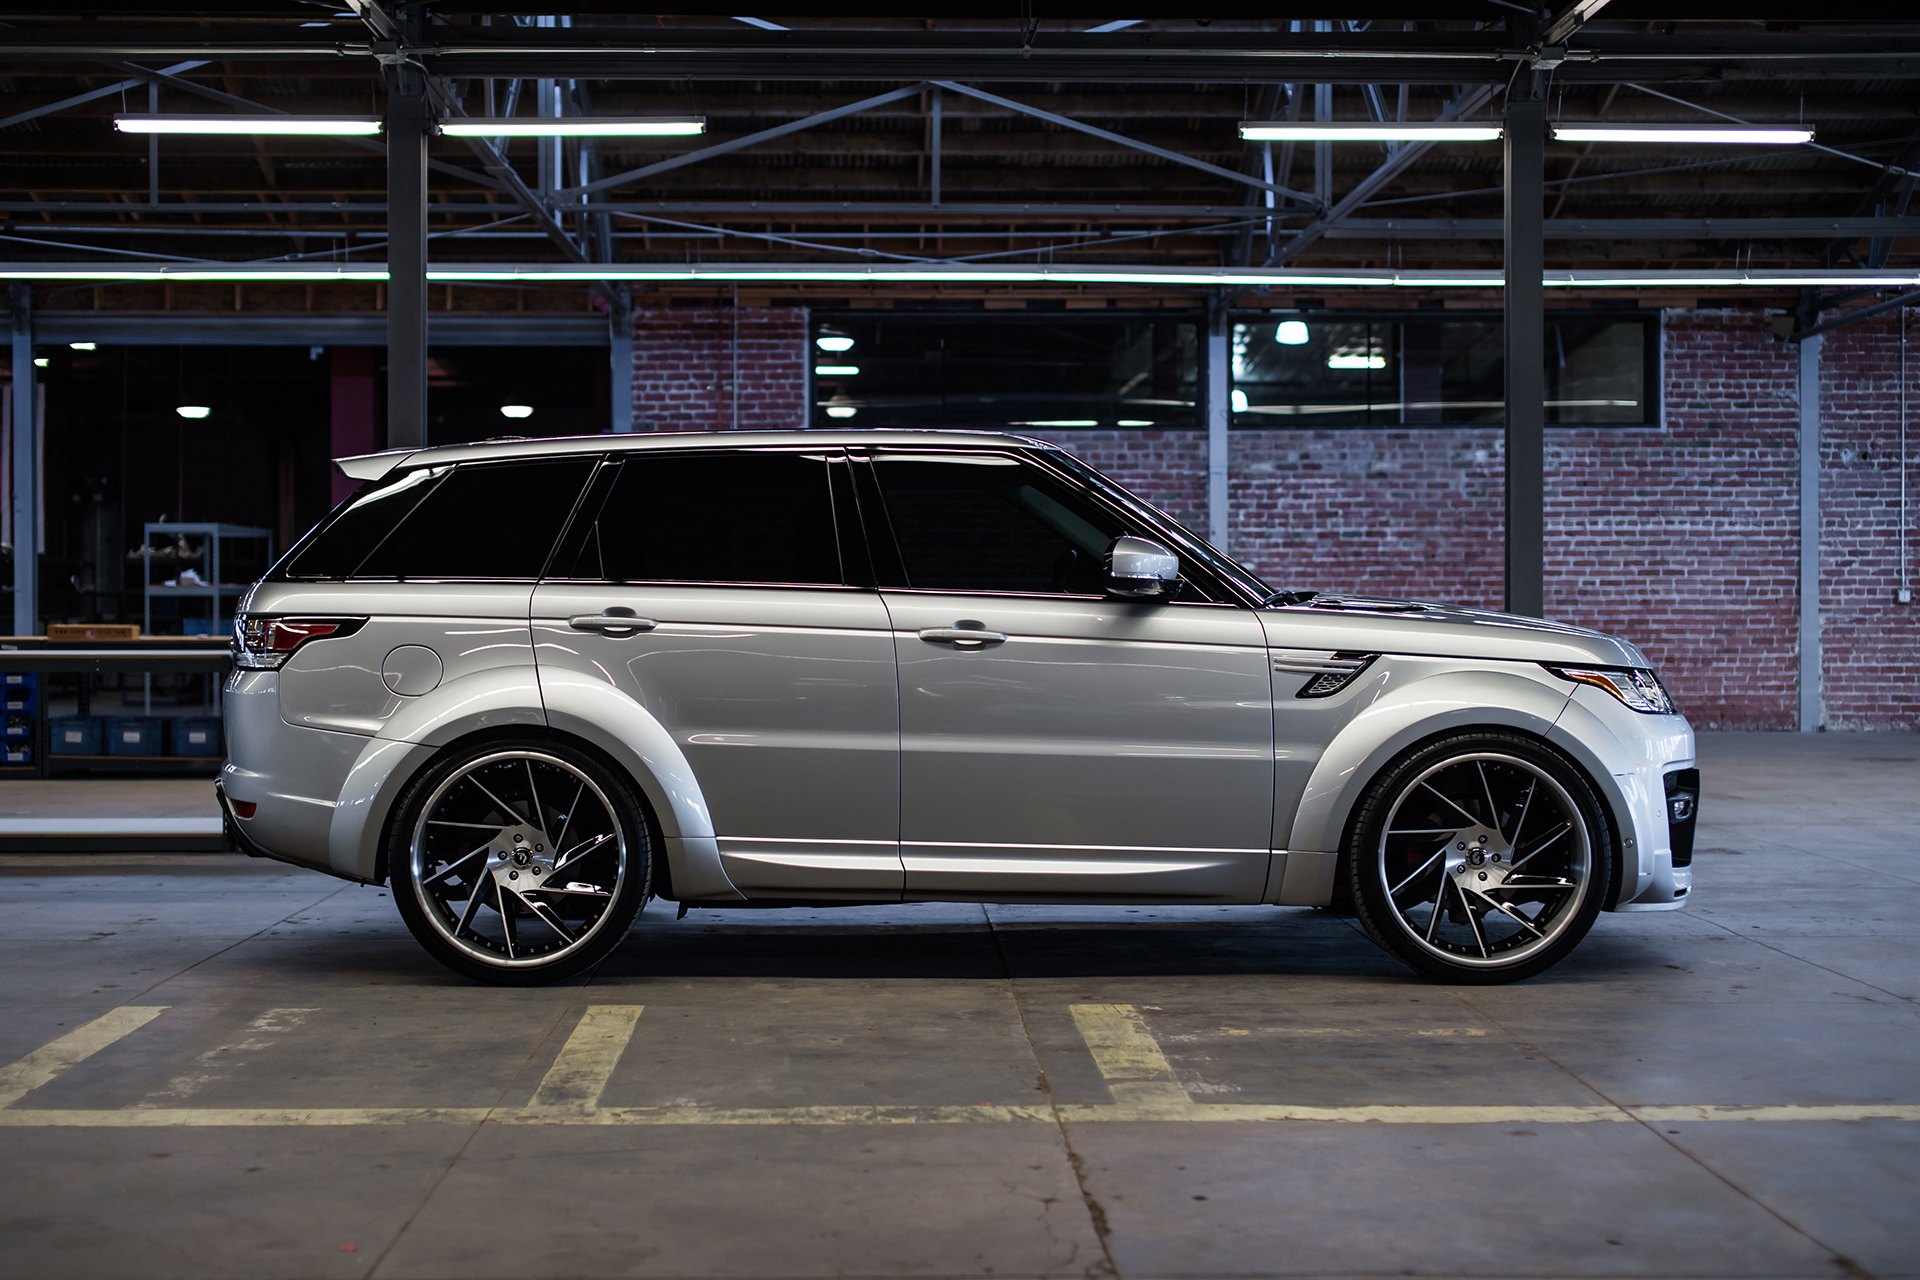 Aftermarket Side Skirts on Gray Range Rover Sport - Photo by Forgiato